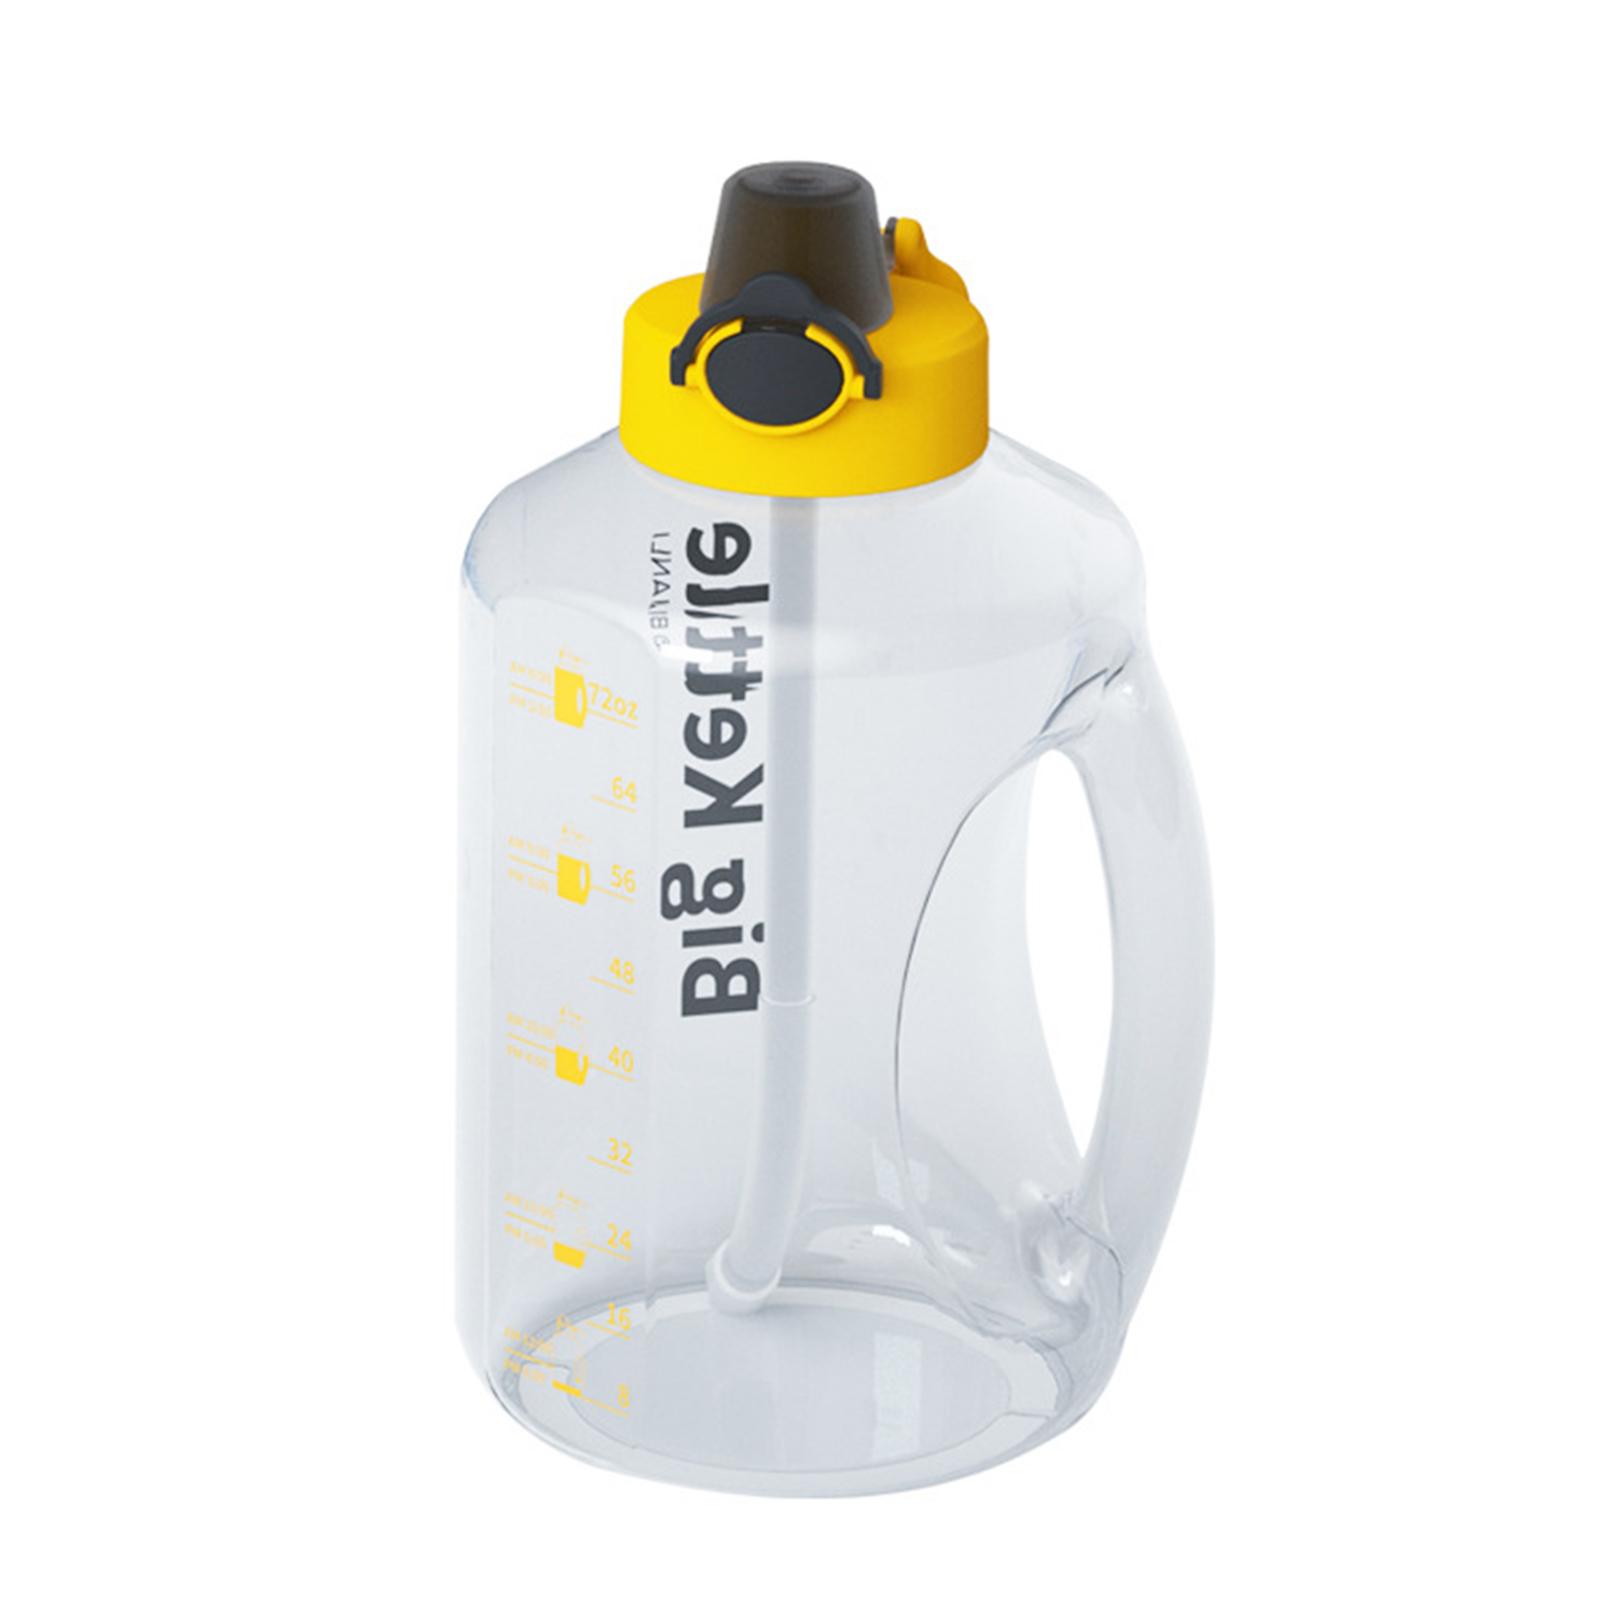 Plastic BPA Free Water Bottle Time Reminder Jug for Sports Outdoor Activity Yellow